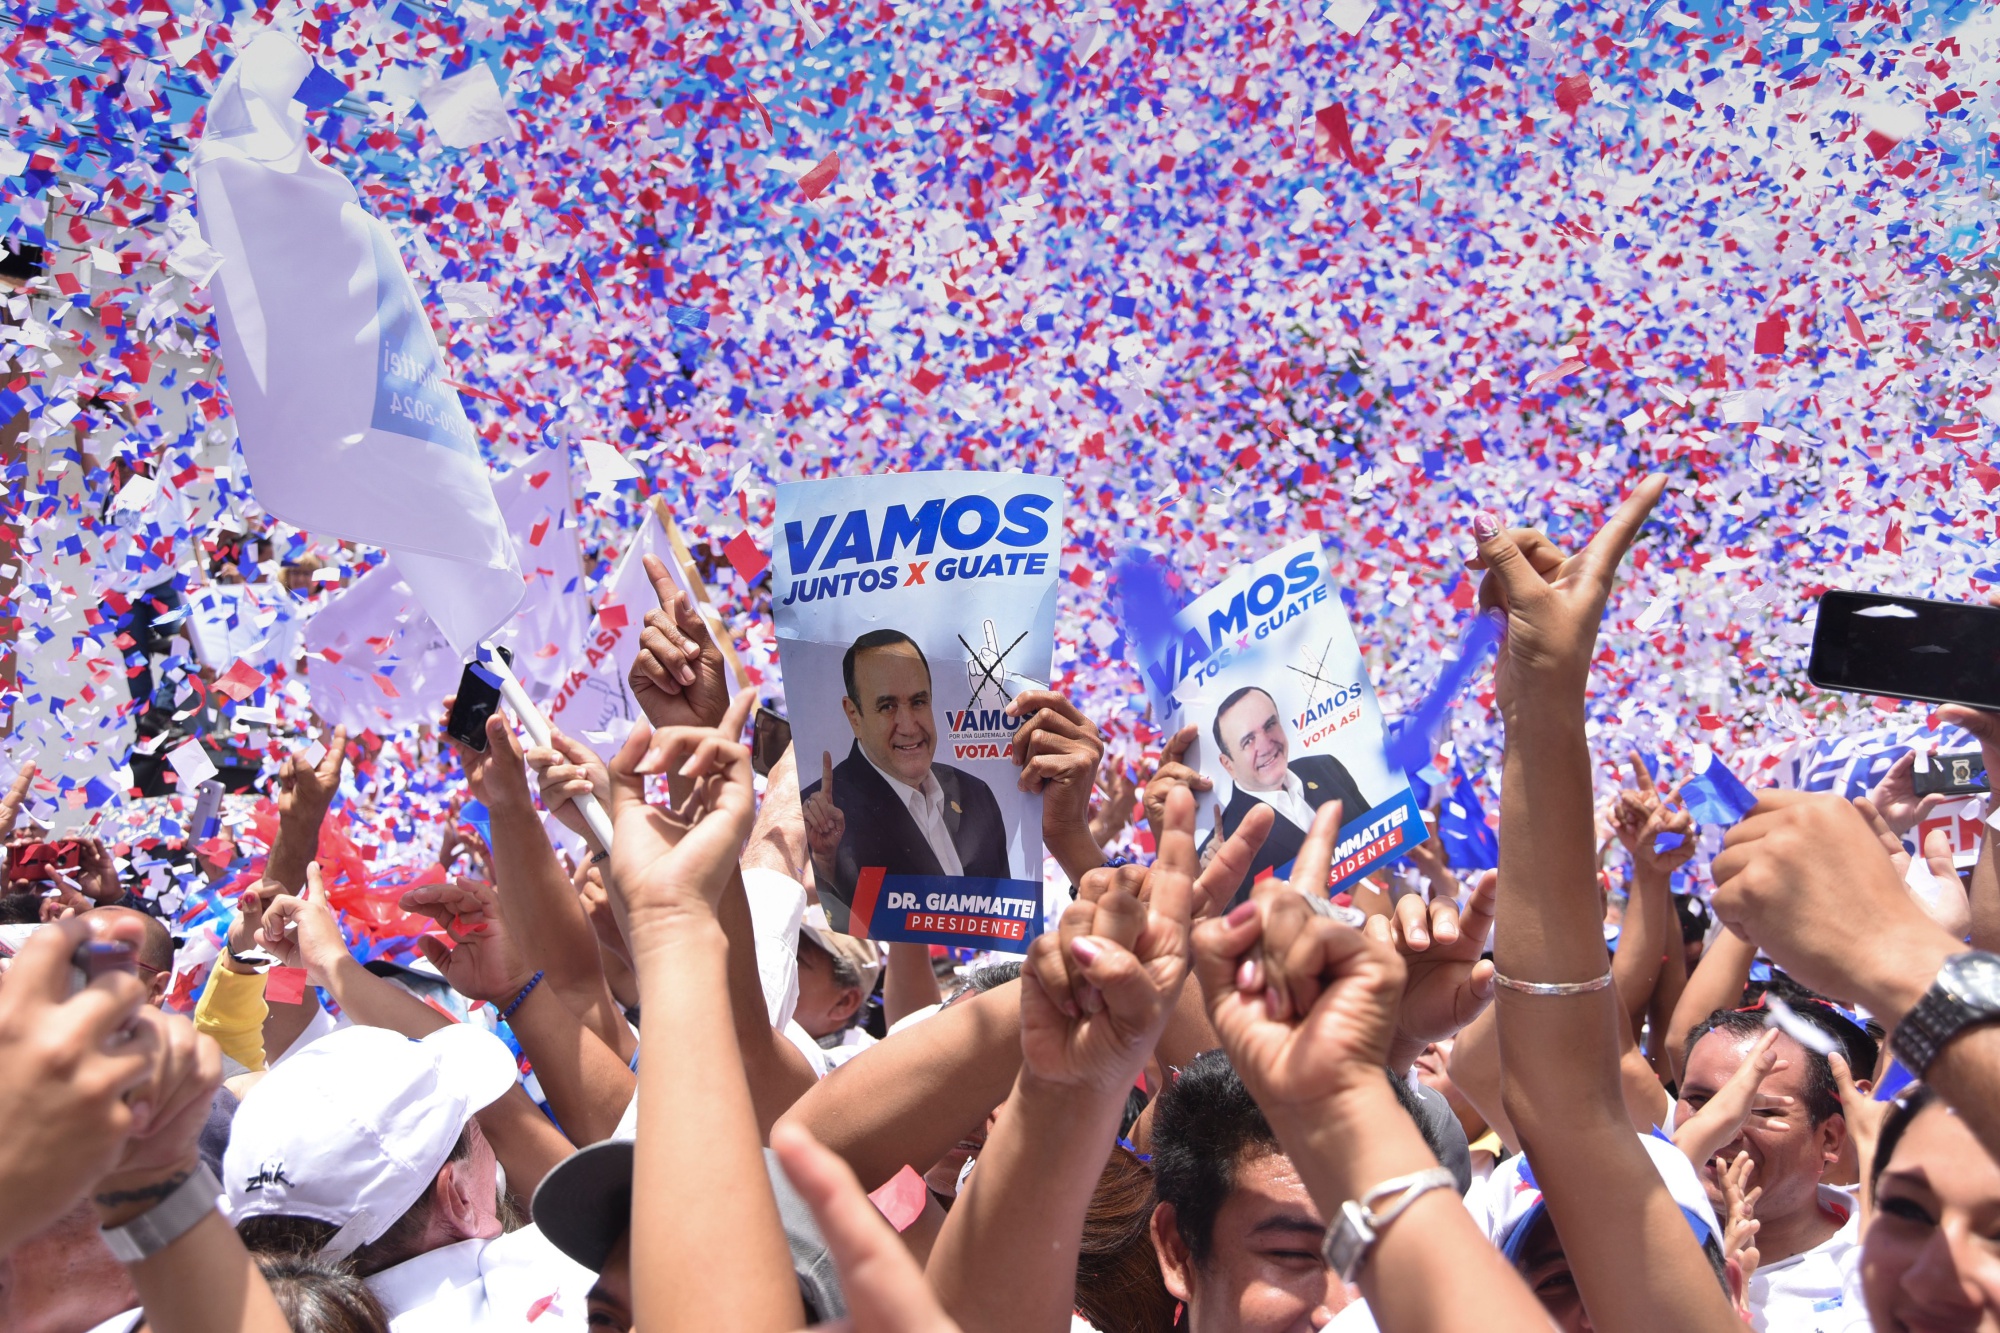 Vamos party supporters hold up posters of Alejandro Giammattei in Guatemala City on August 4